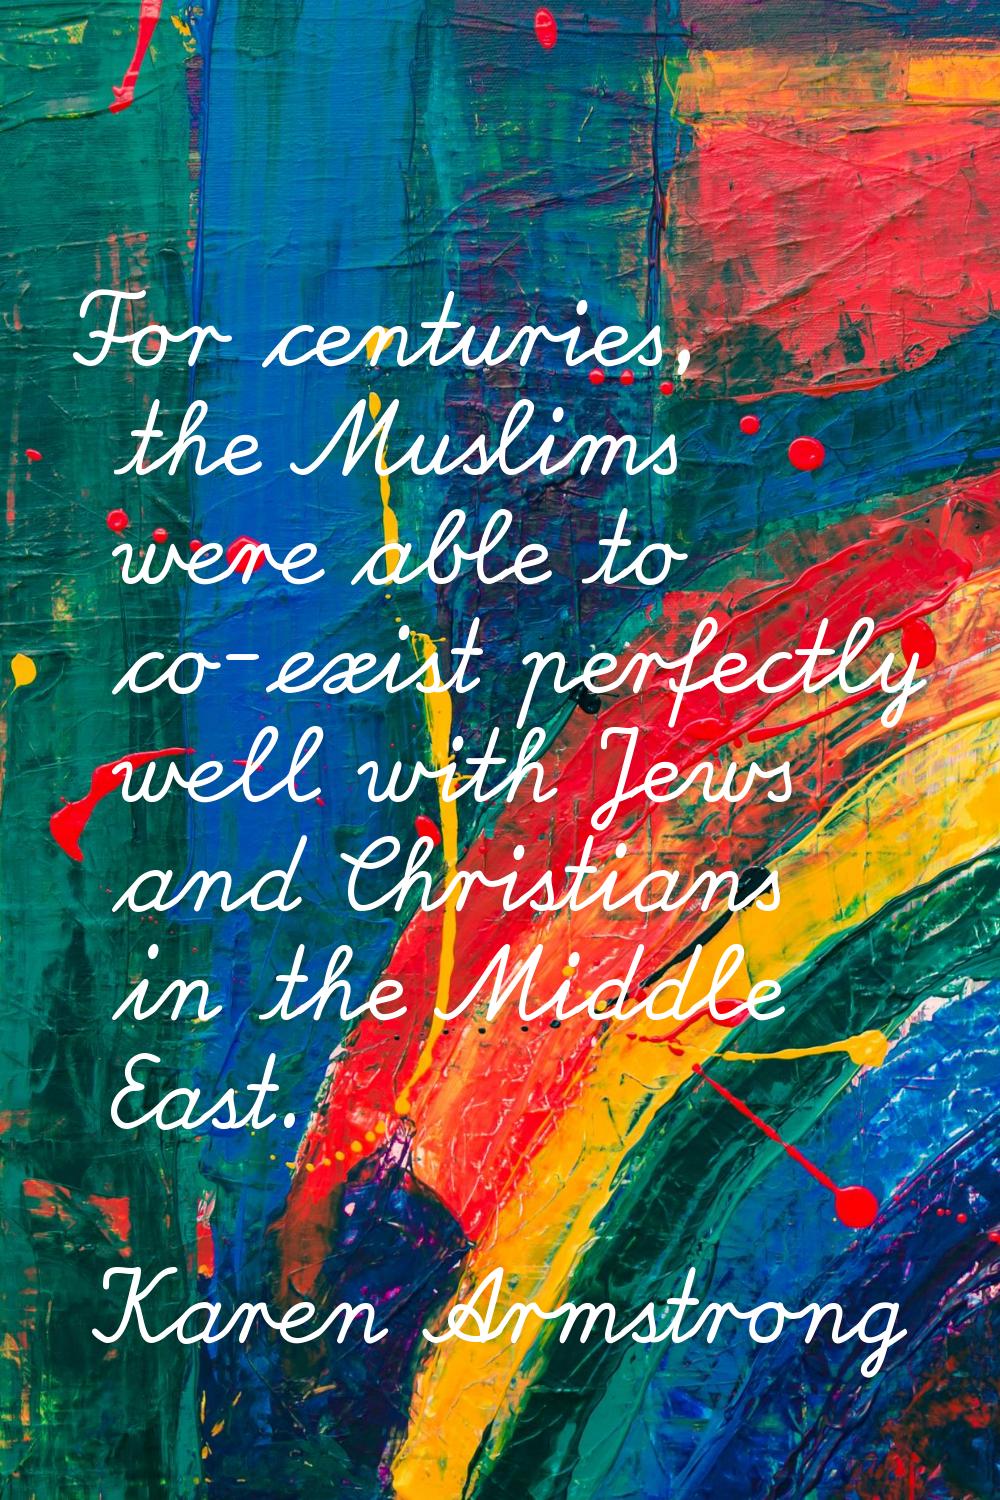 For centuries, the Muslims were able to co-exist perfectly well with Jews and Christians in the Mid